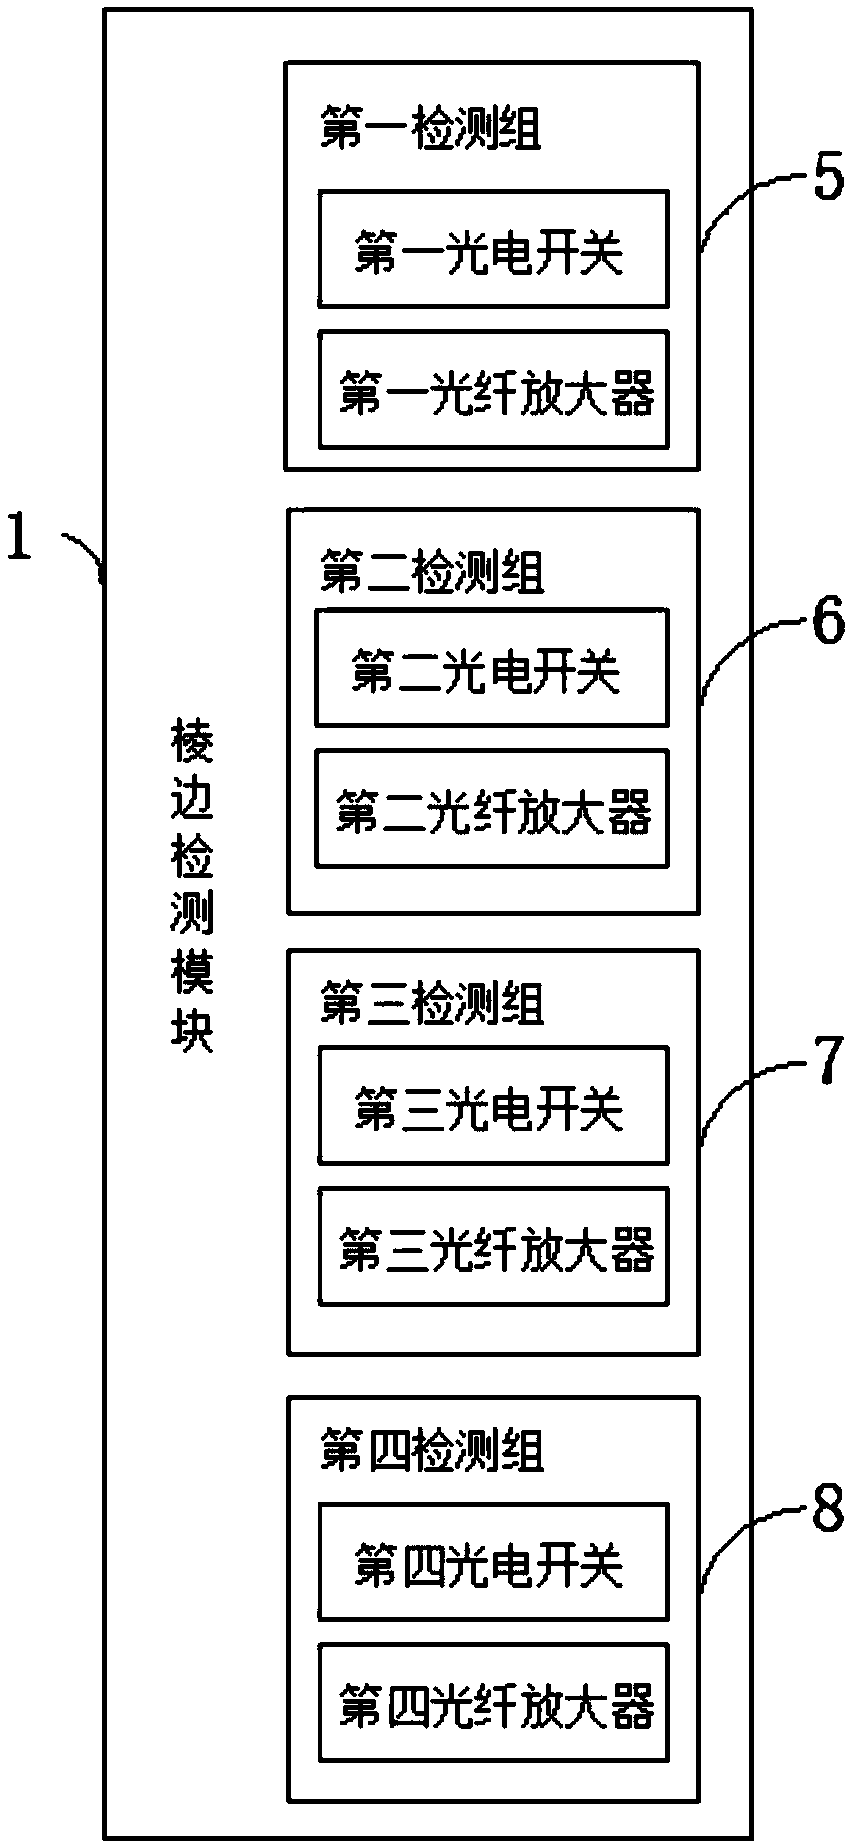 A system and method for automatic detection and sorting of bamboo strips